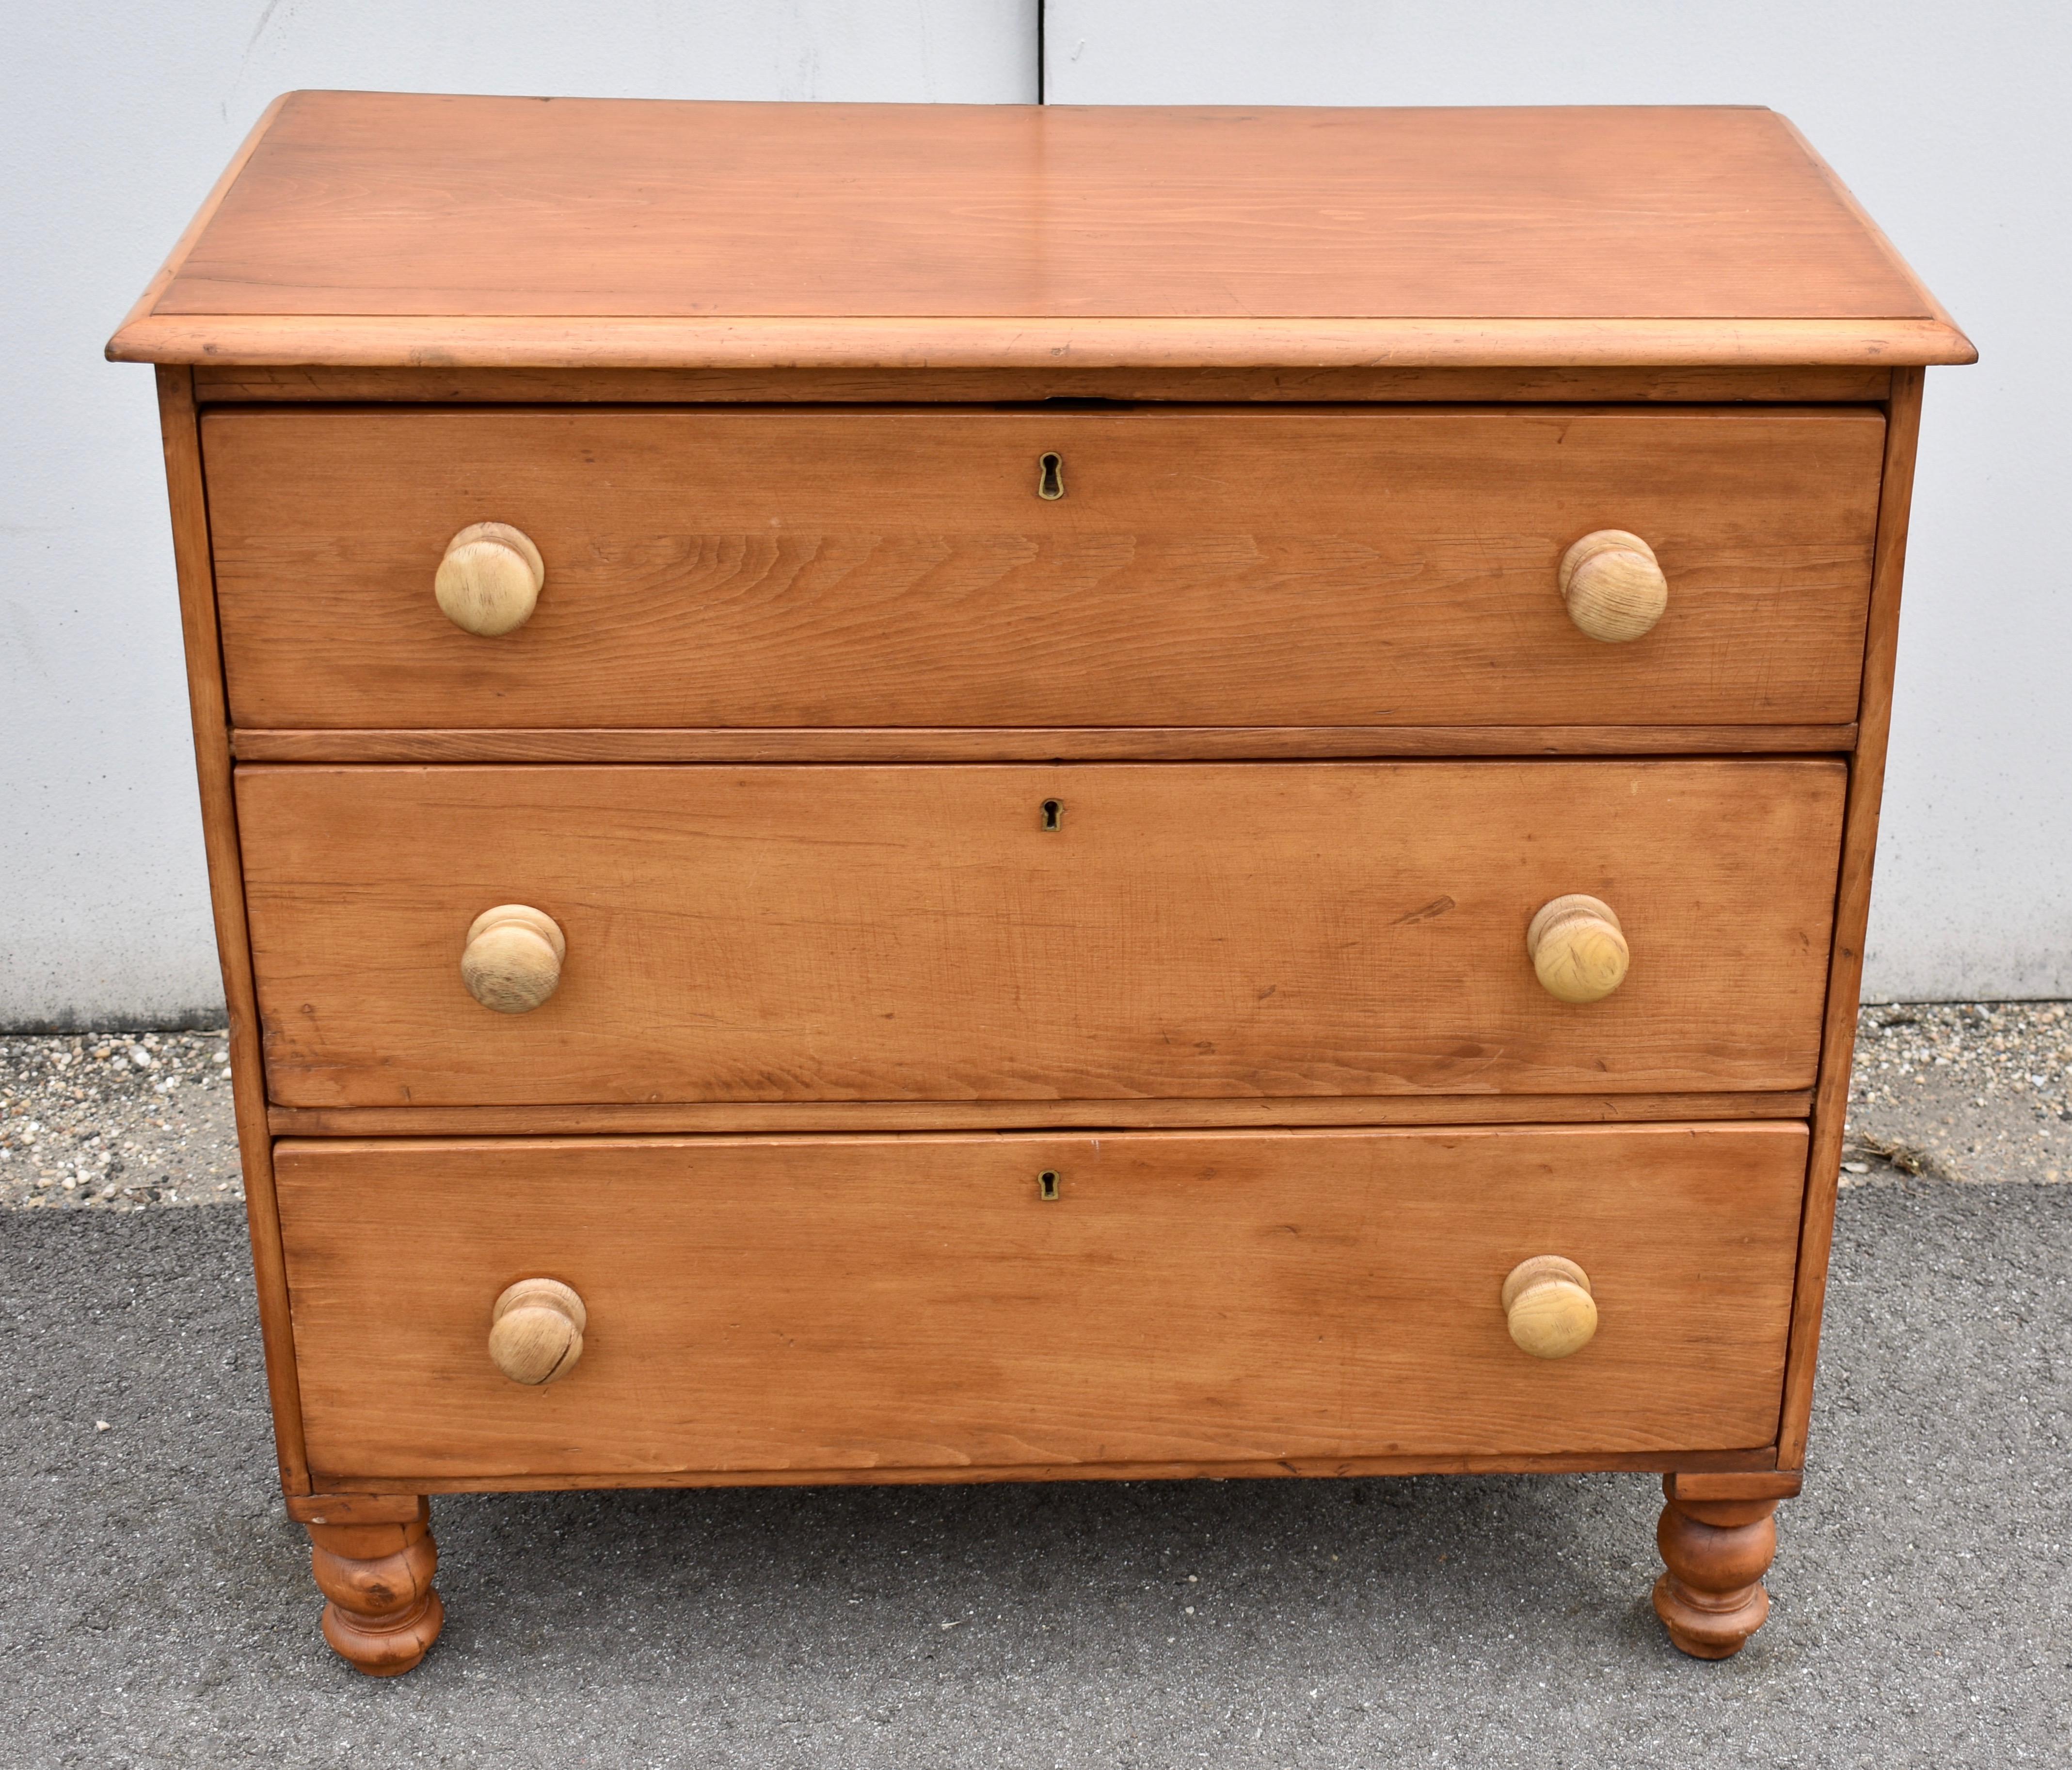 JSK01 Pine Three Drawer Chest 35.5”Wx17.5”Dx33”H England circa 1880 $1295.00
This pretty three drawer chest is very light in weight, as is typical of late nineteenth century English pieces made of “deal”, as this type of pine was known.  The wood is